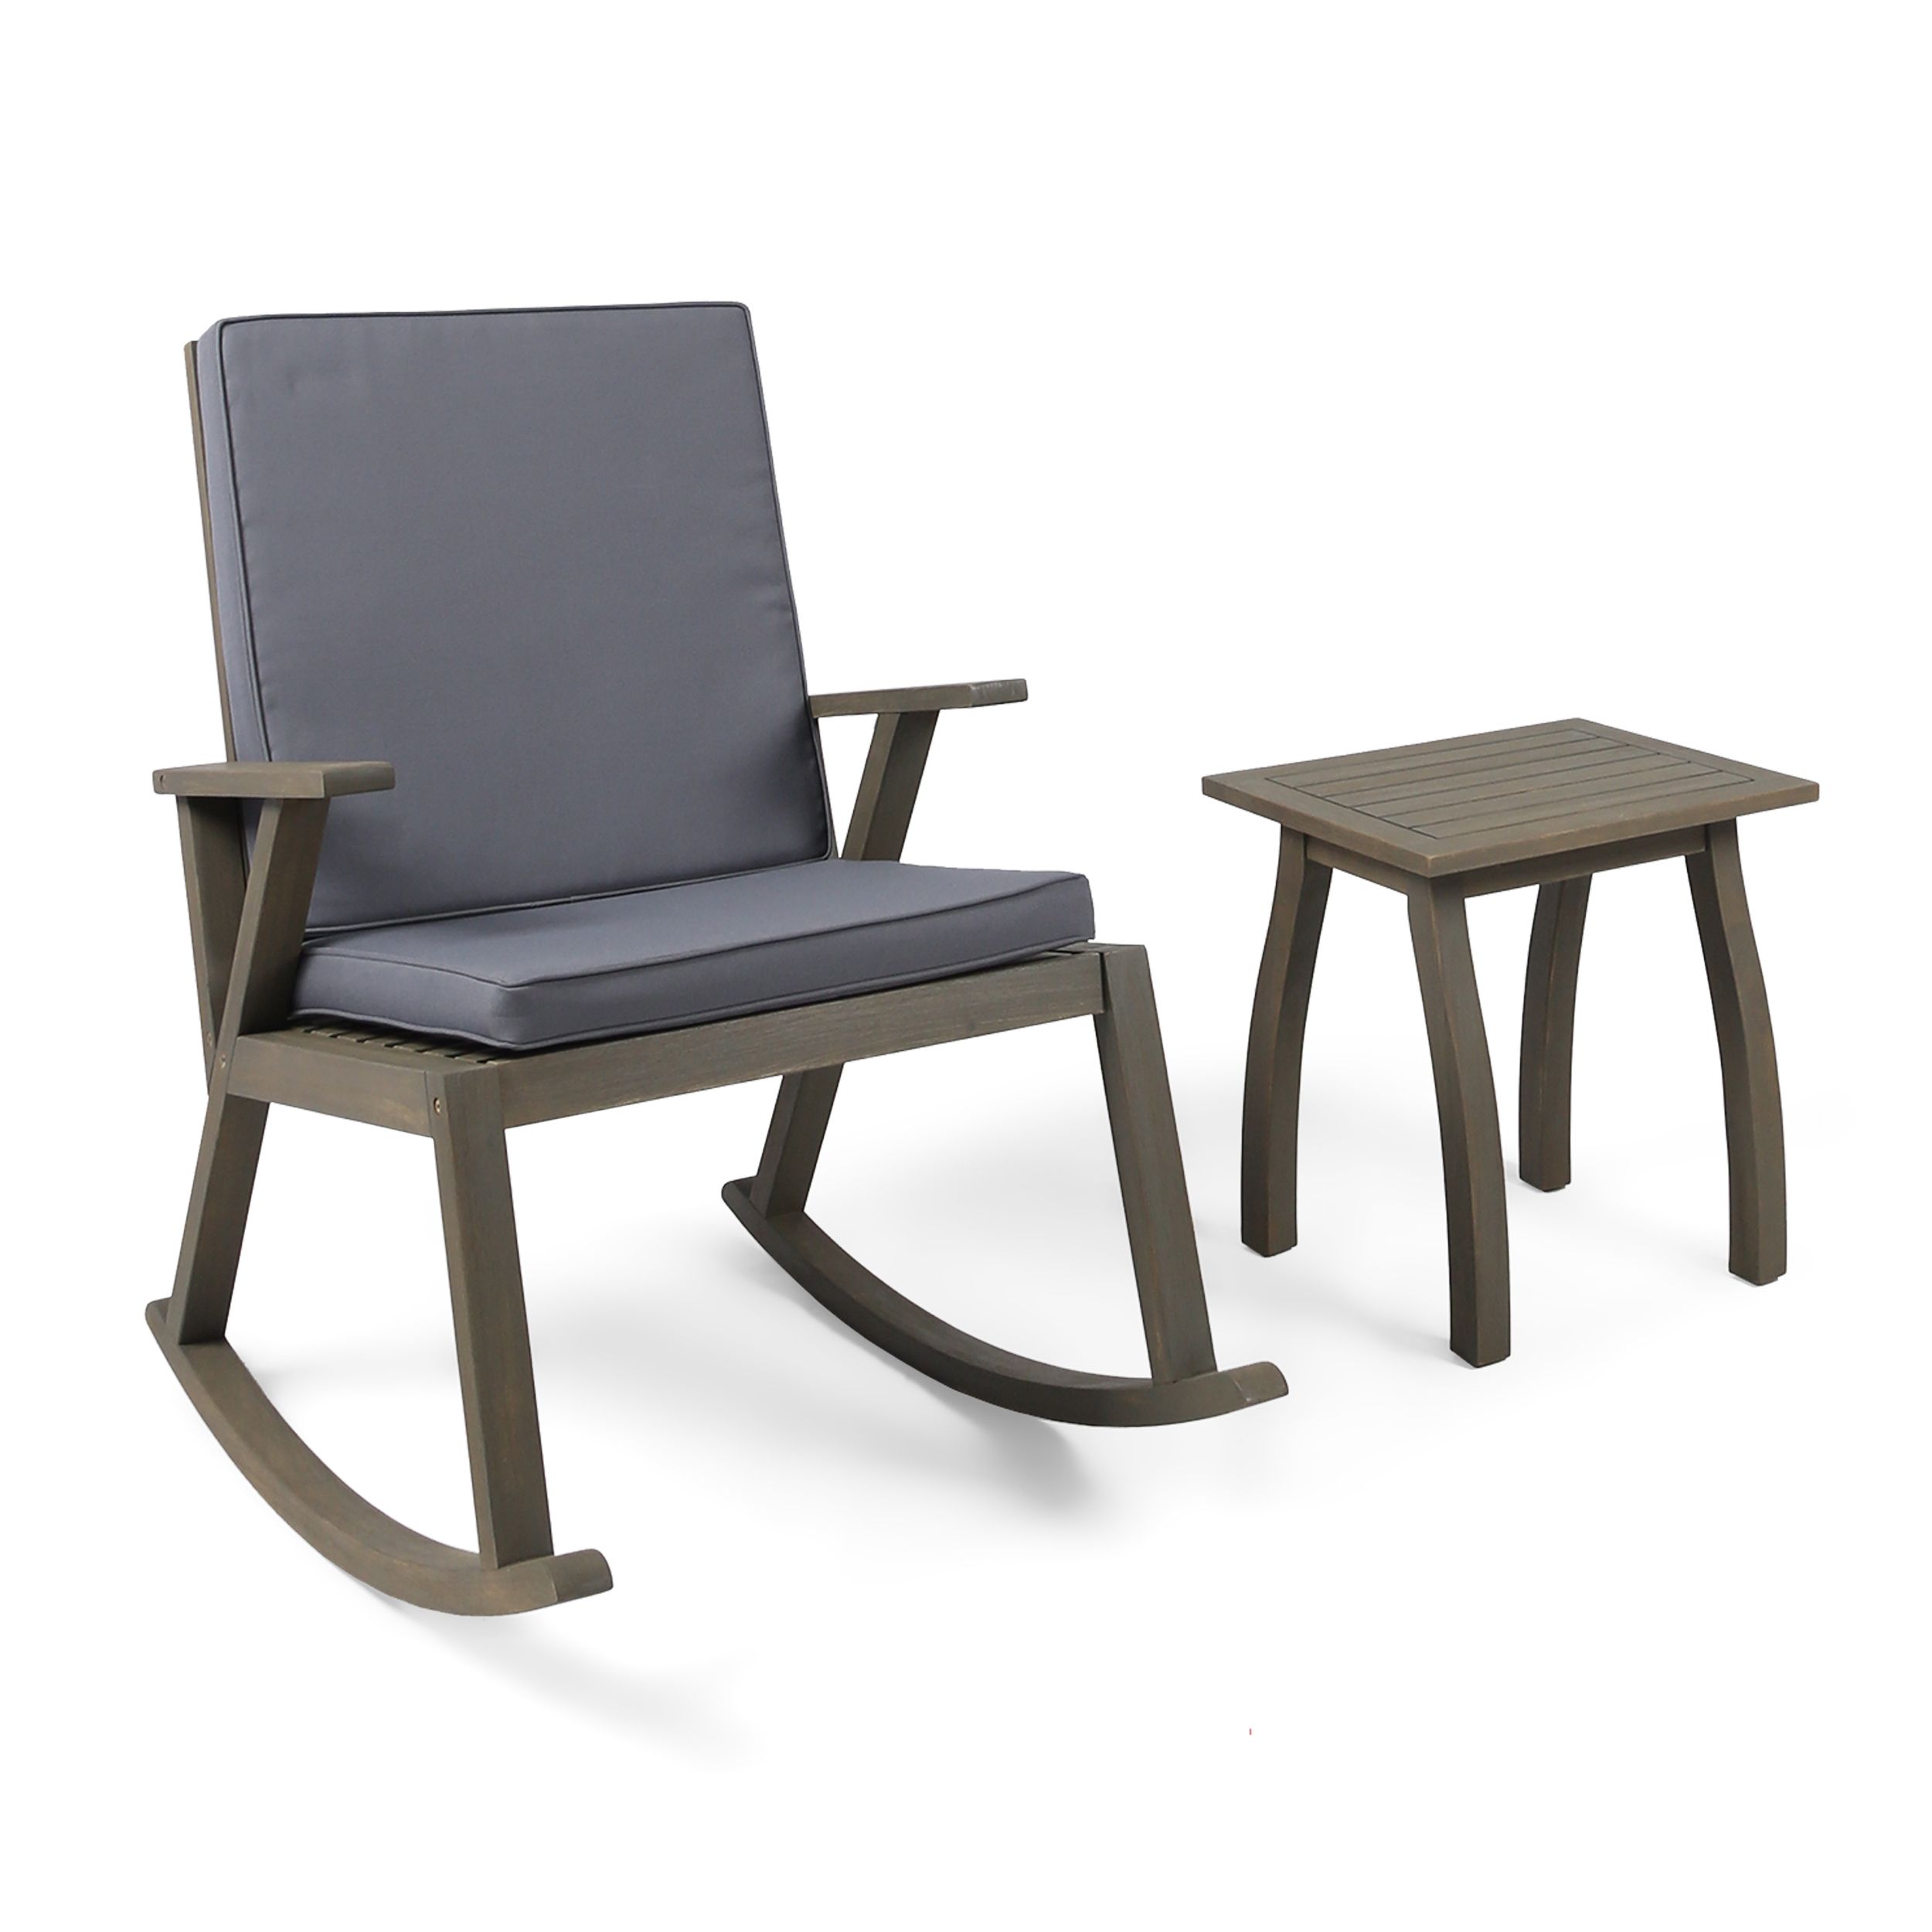 Brixton Outdoor Acacia Wood Rocking Chair With Side Table, Gray And Within Dark Wood Outdoor Chairs (View 8 of 15)